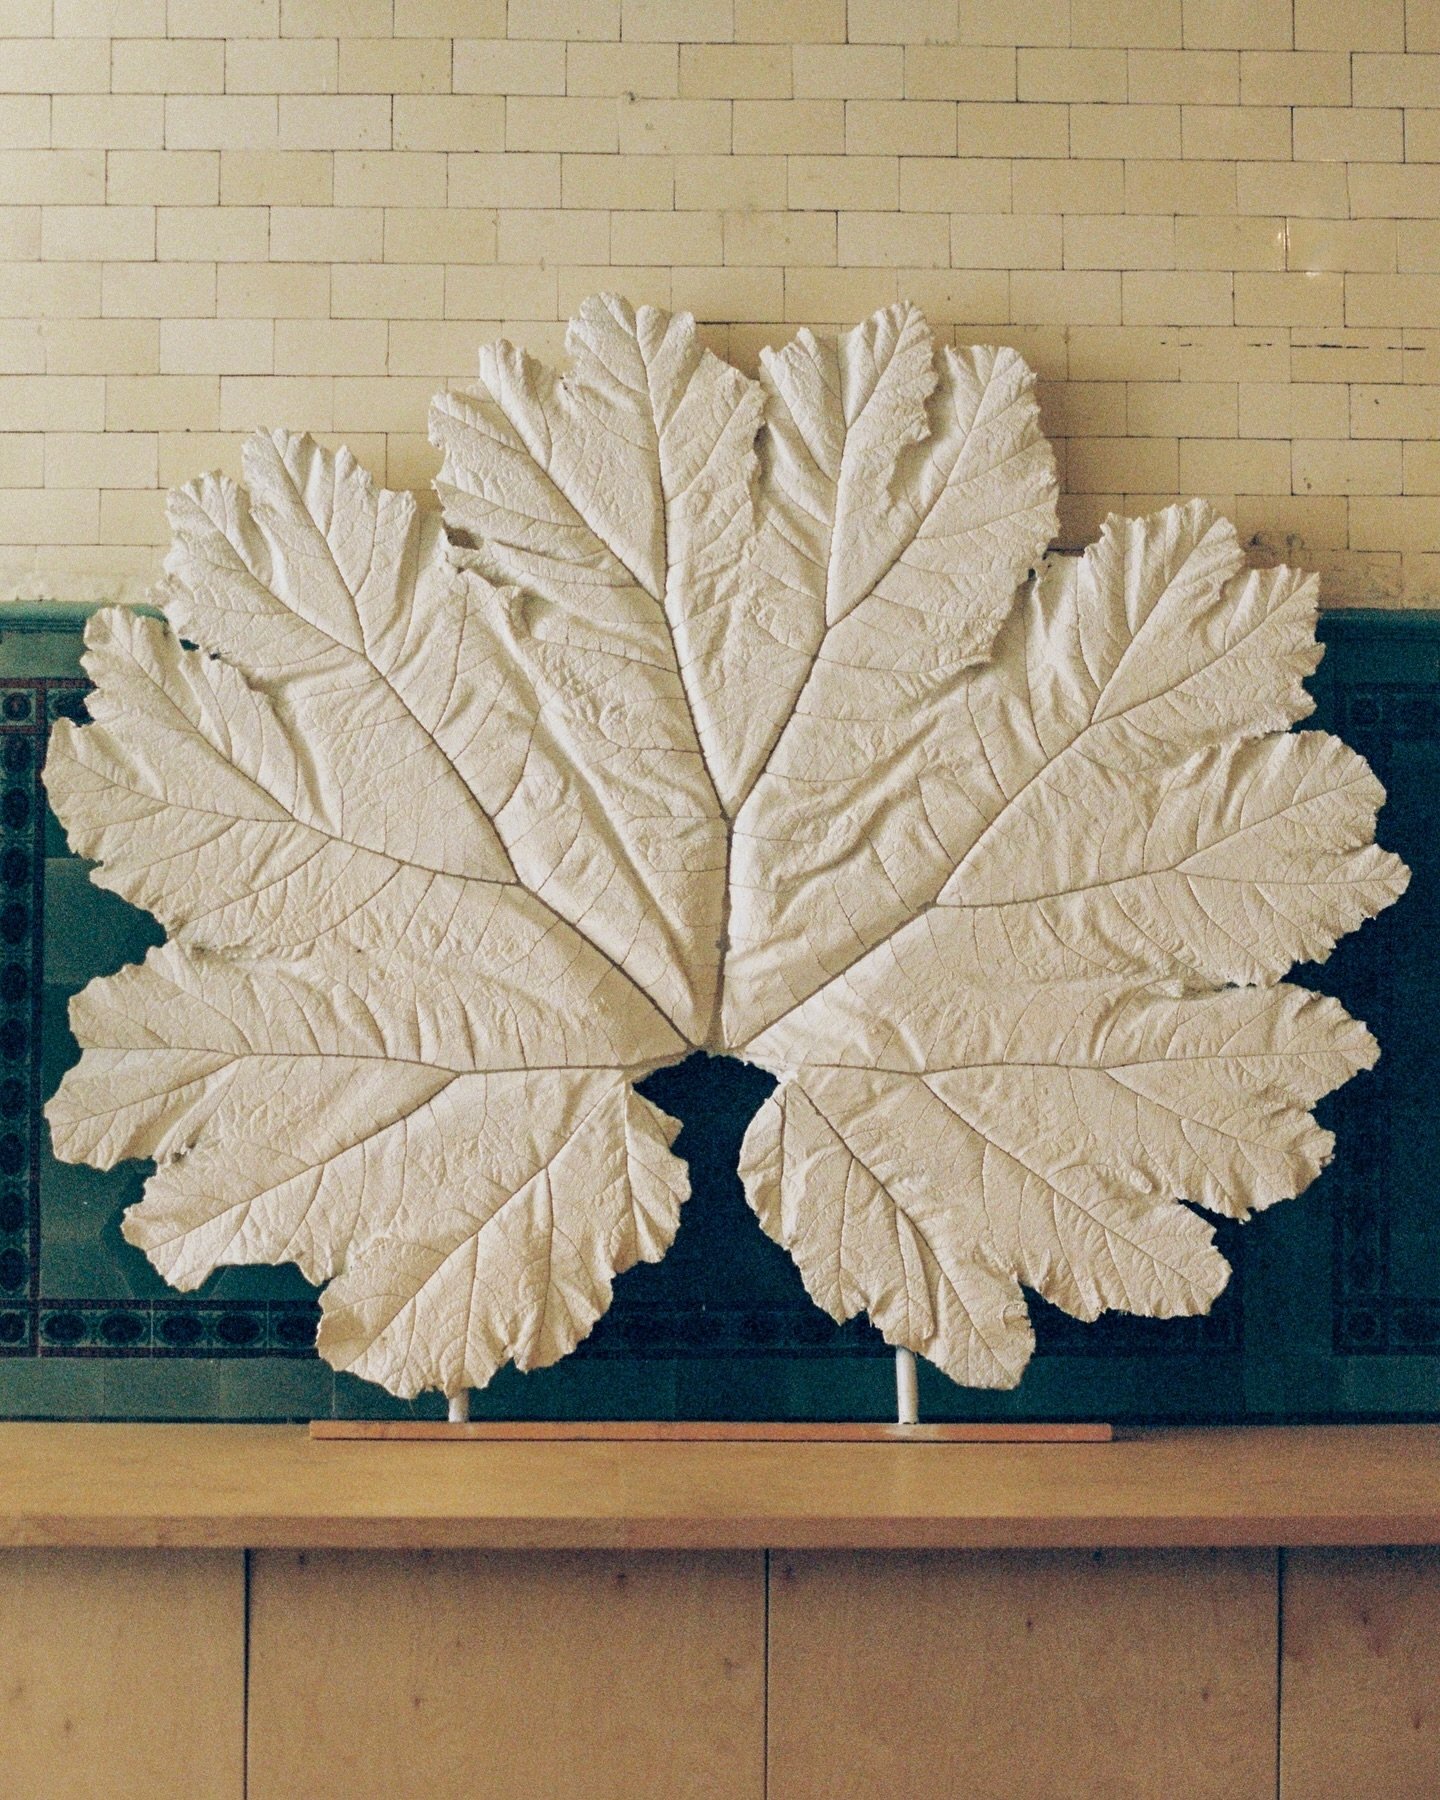 This magnificent, one of a kind, 2 meter wide plaster Gunnera Leaf is for sale. Pop us an email for enquiries or for a viewing in Mayfair, London - studio@jesswheeler.con